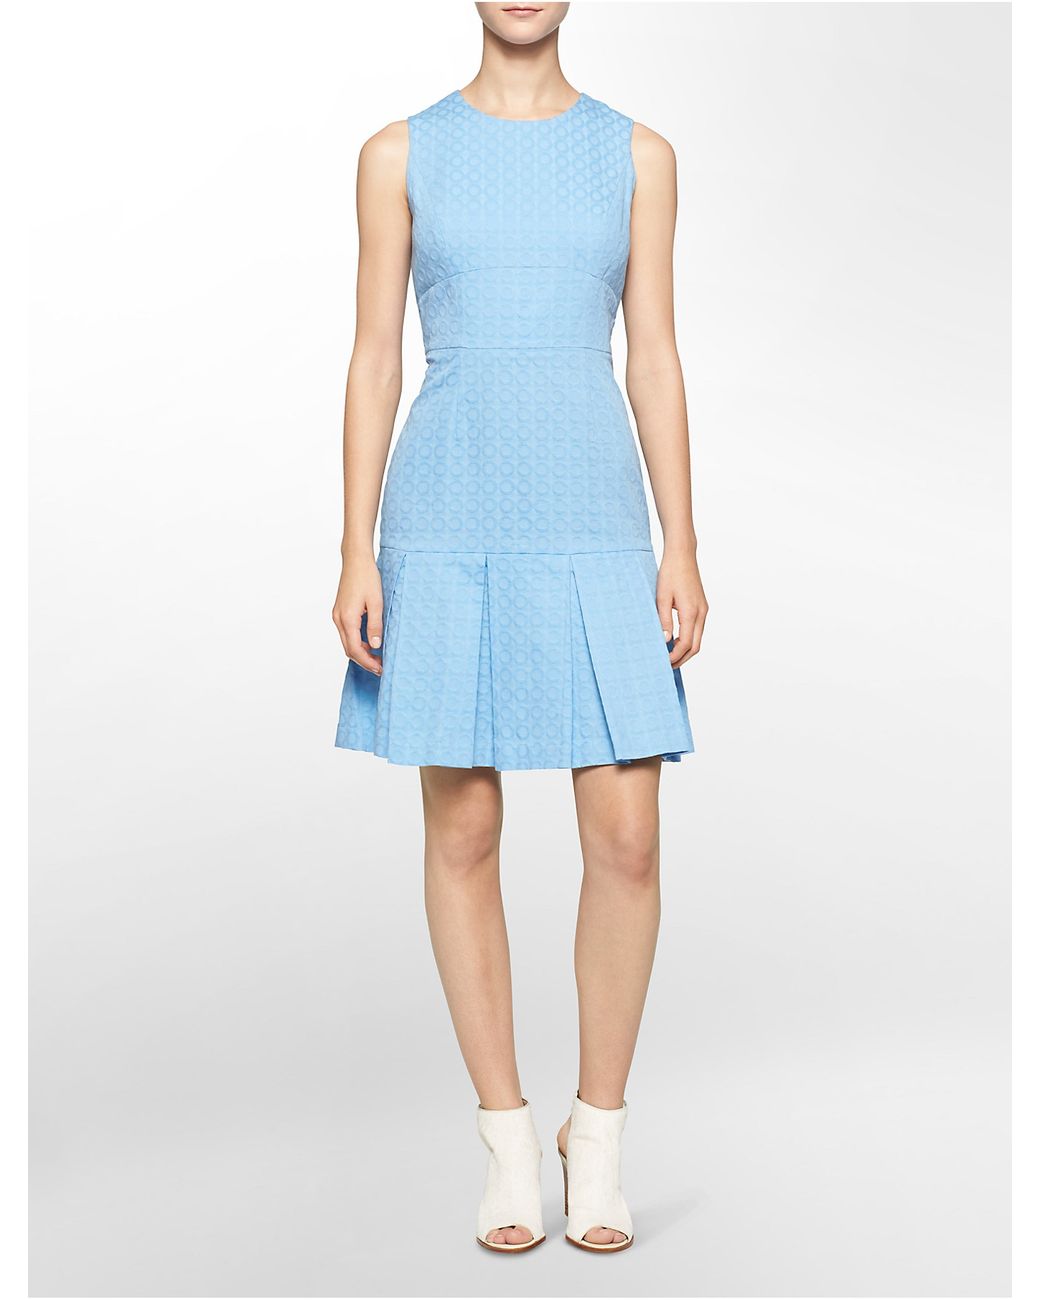 Calvin Klein White Label Textured Pleated Sleeveless Fit + Flare Dress in  Blue | Lyst